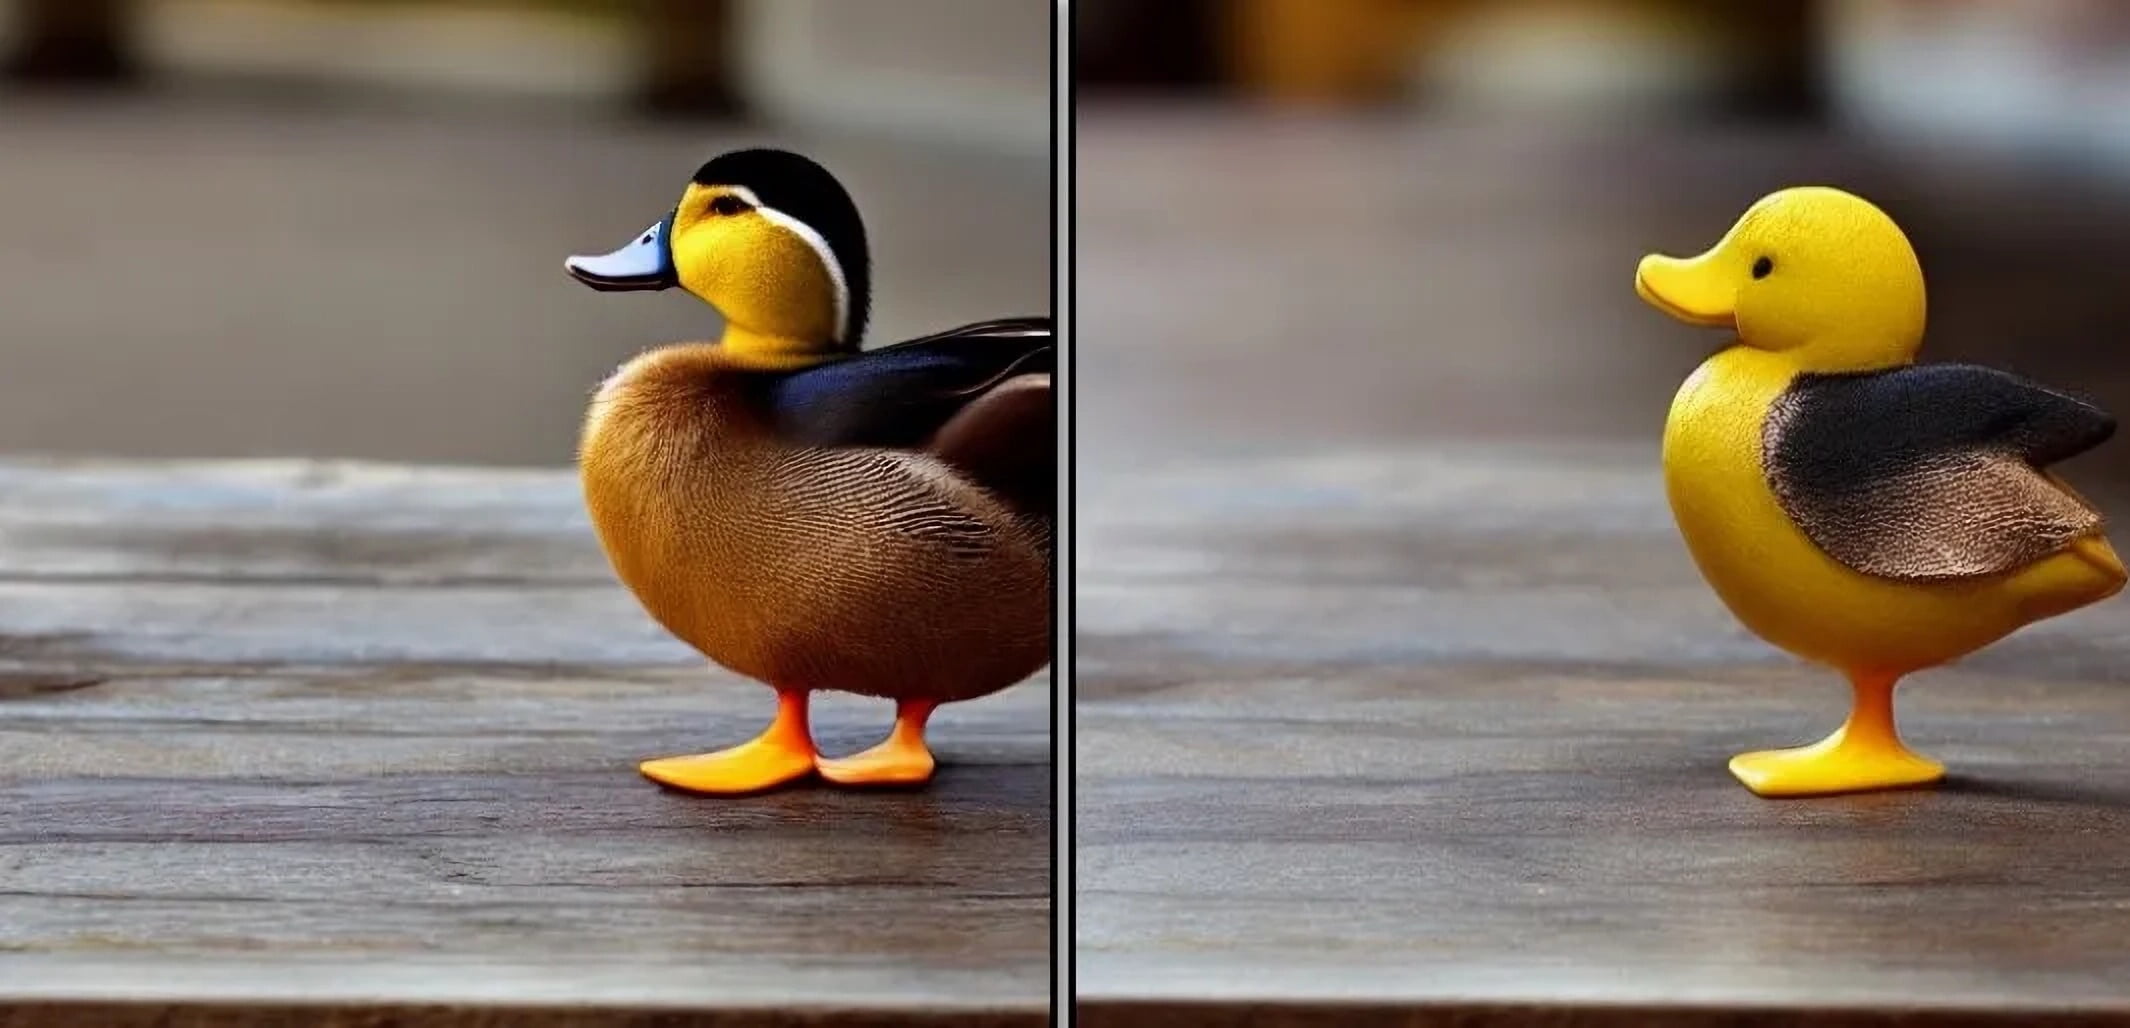 Pix2pix-zero: Adobe unveils new image processing method for Stable Diffusion